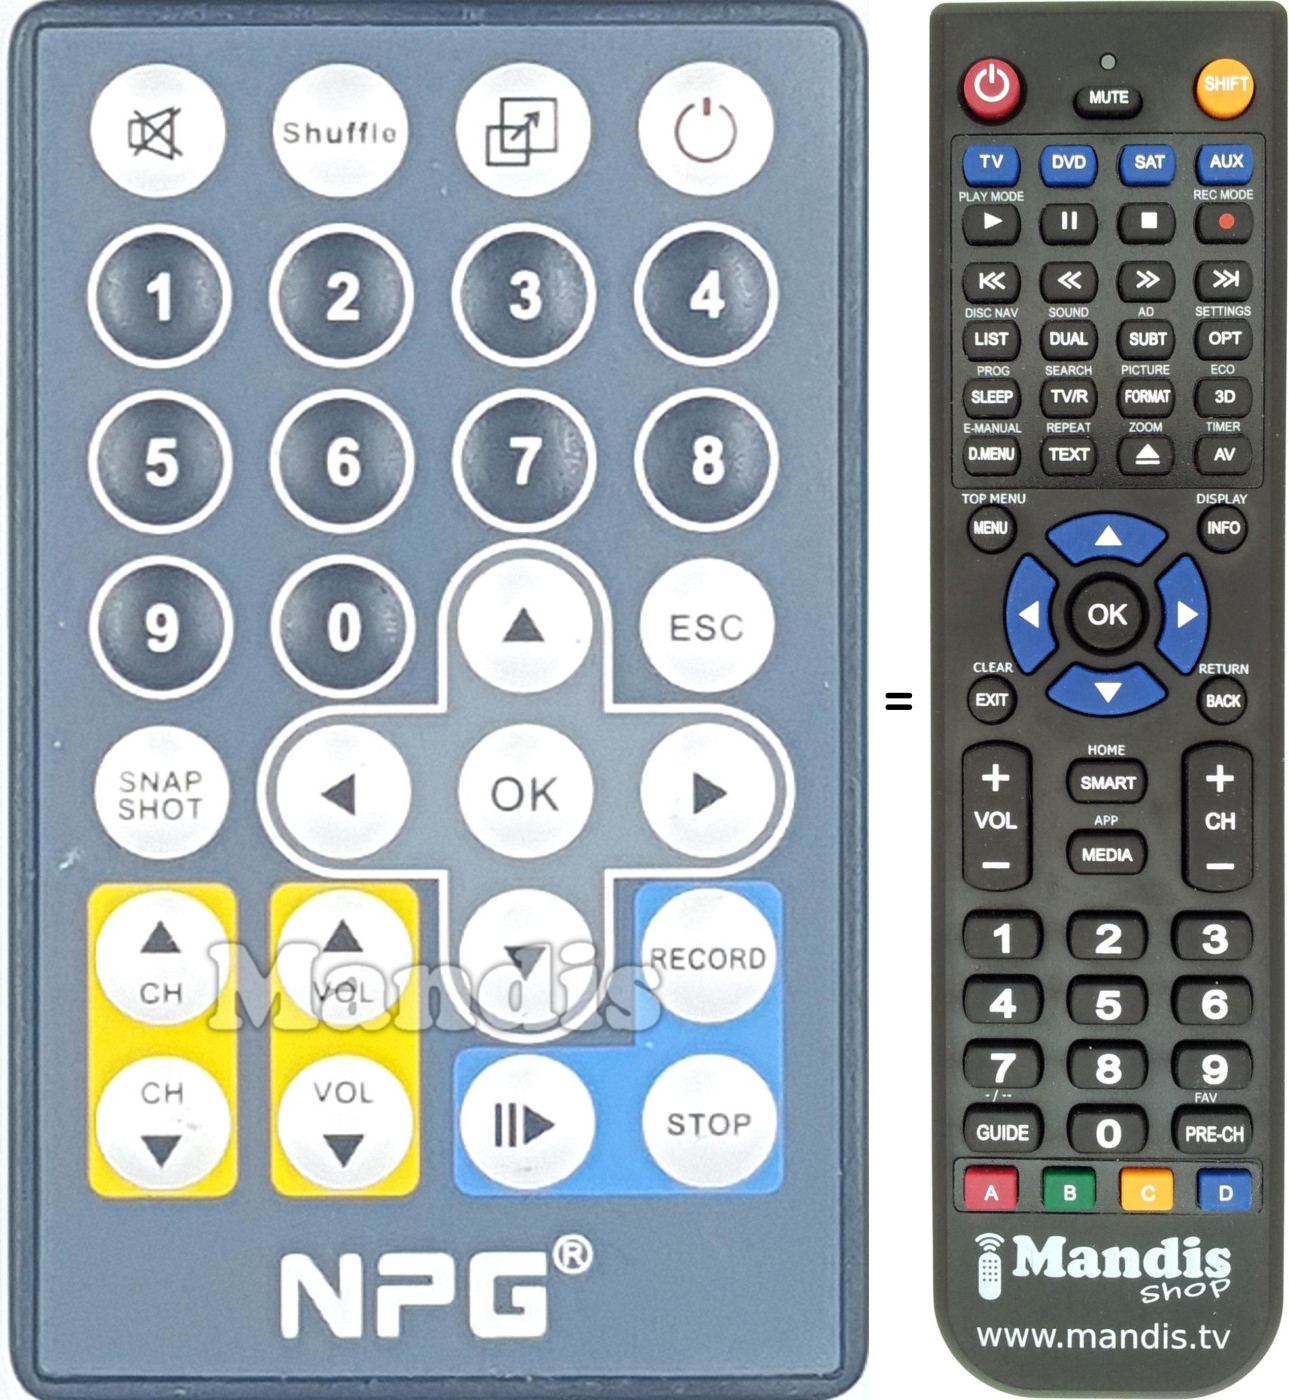 Replacement remote control NPG016